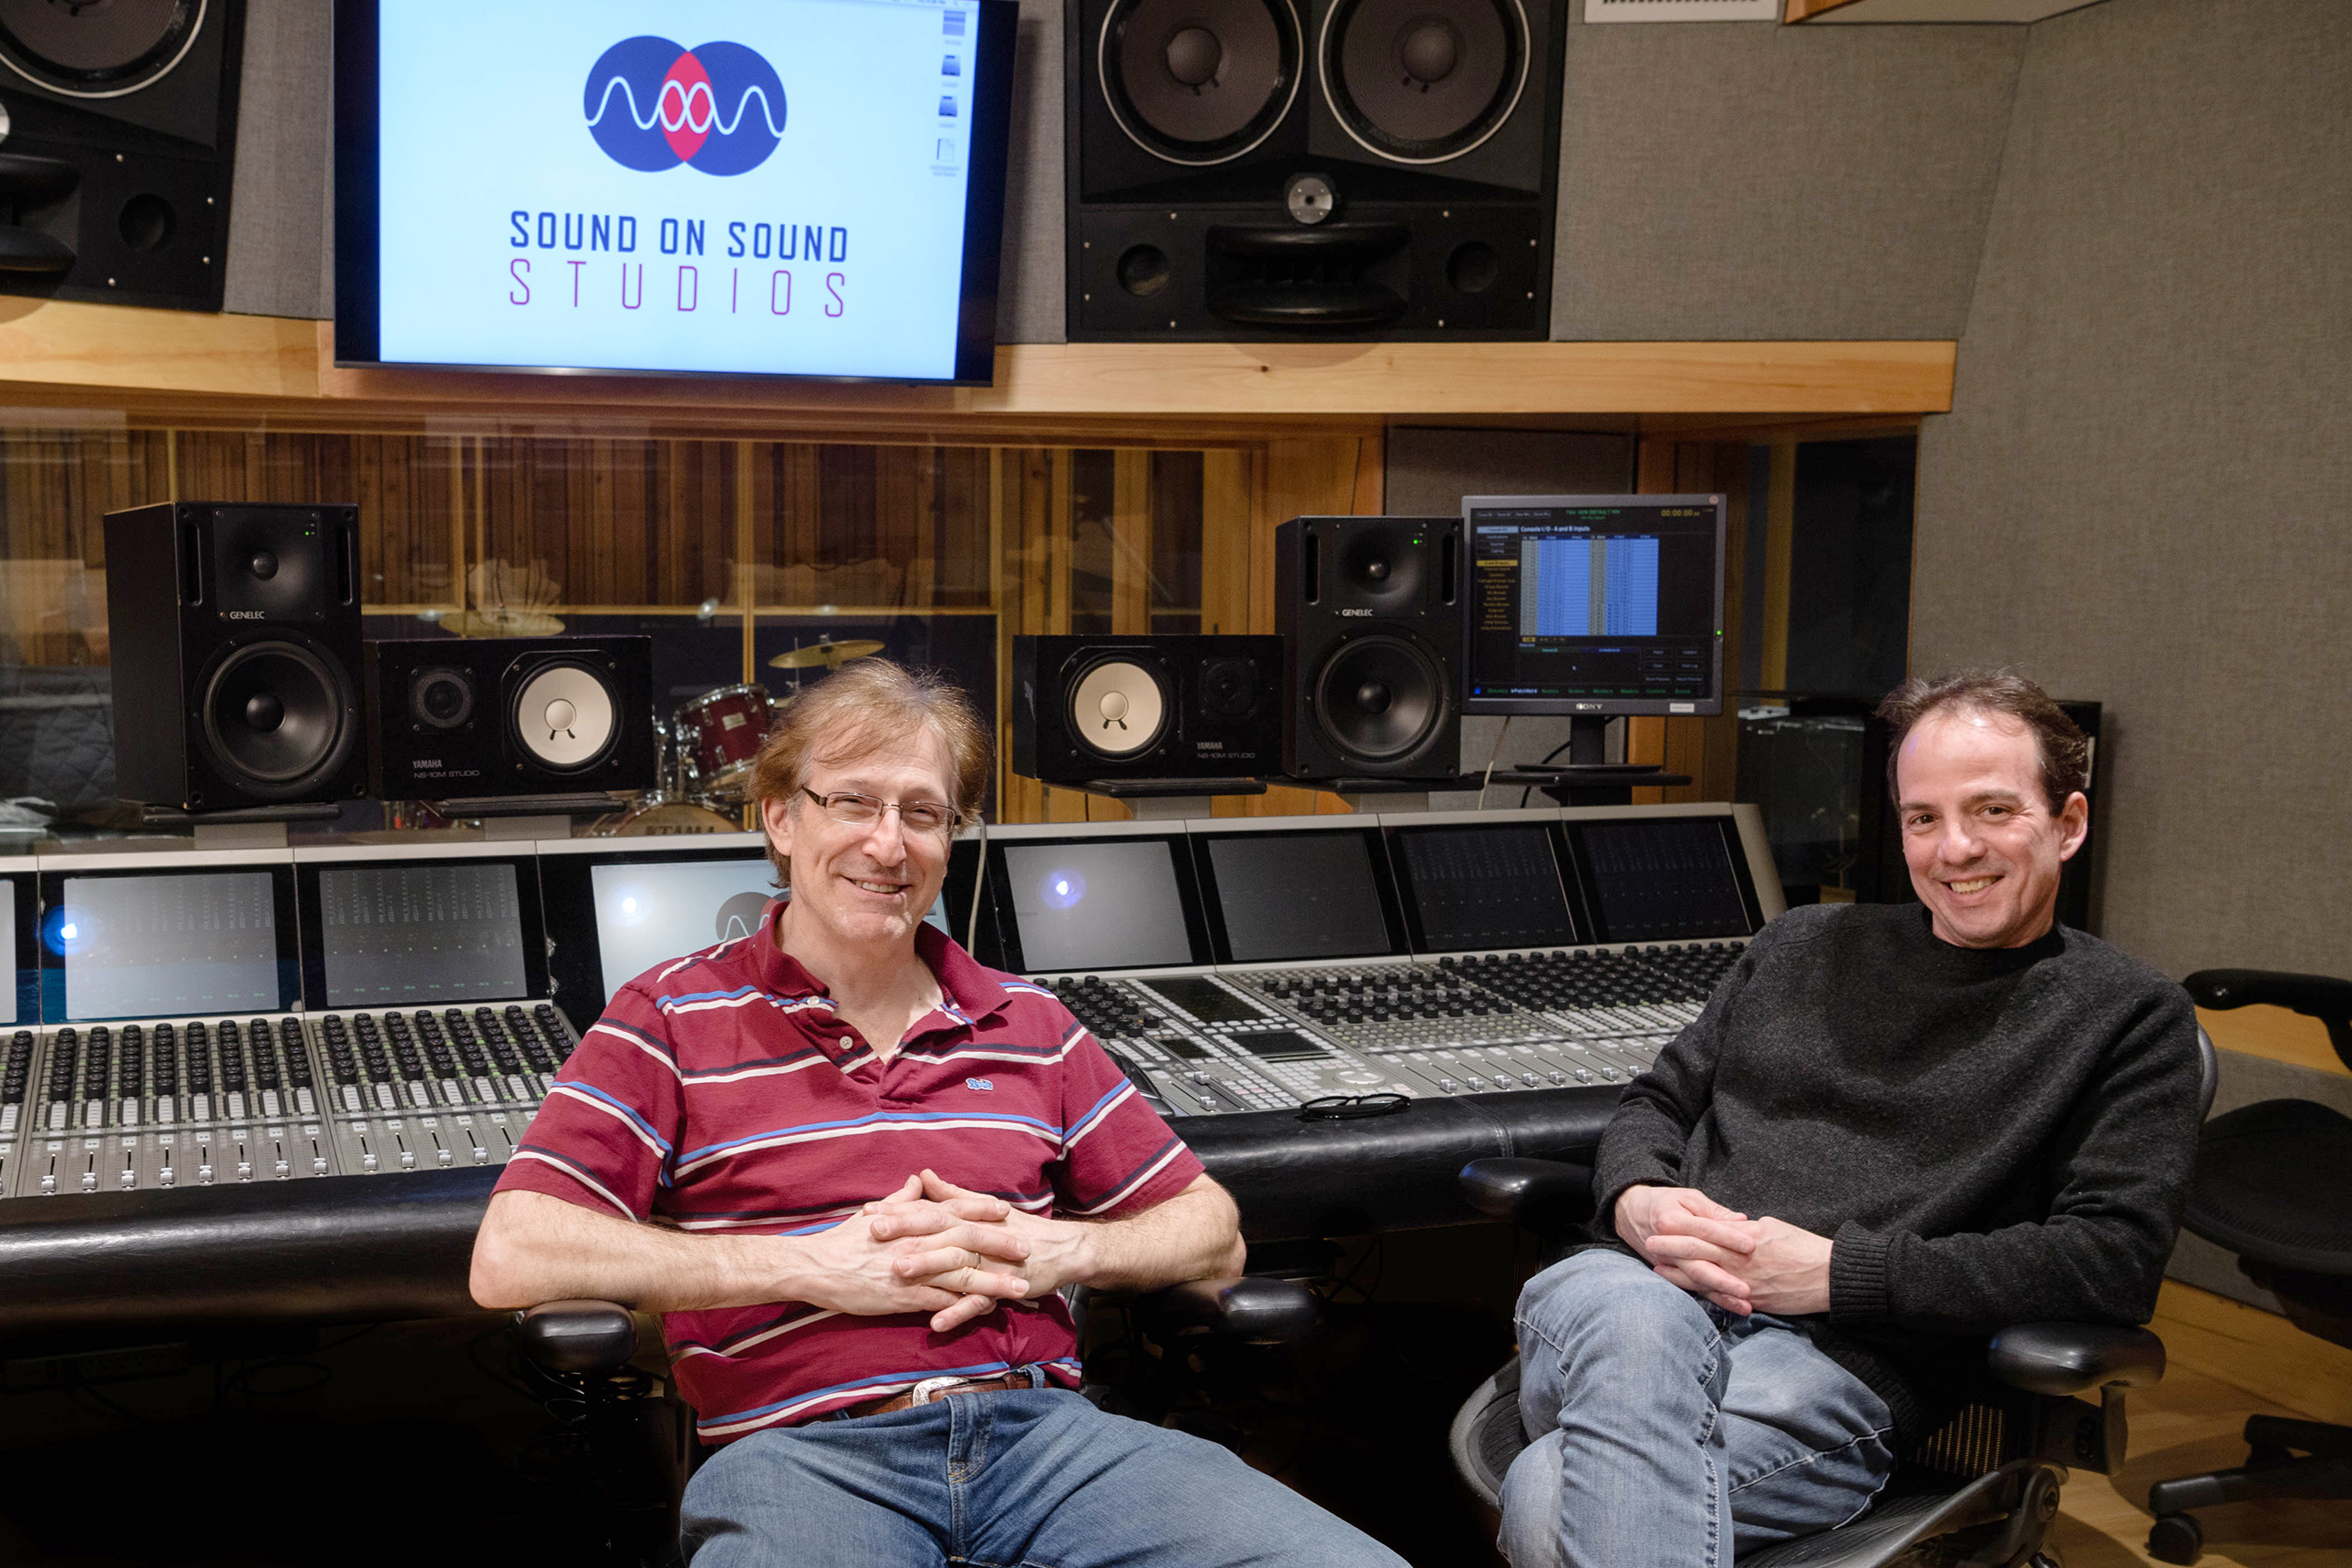 A Feast for the Ears: Sound on Sound brings world-class studio to Montclair